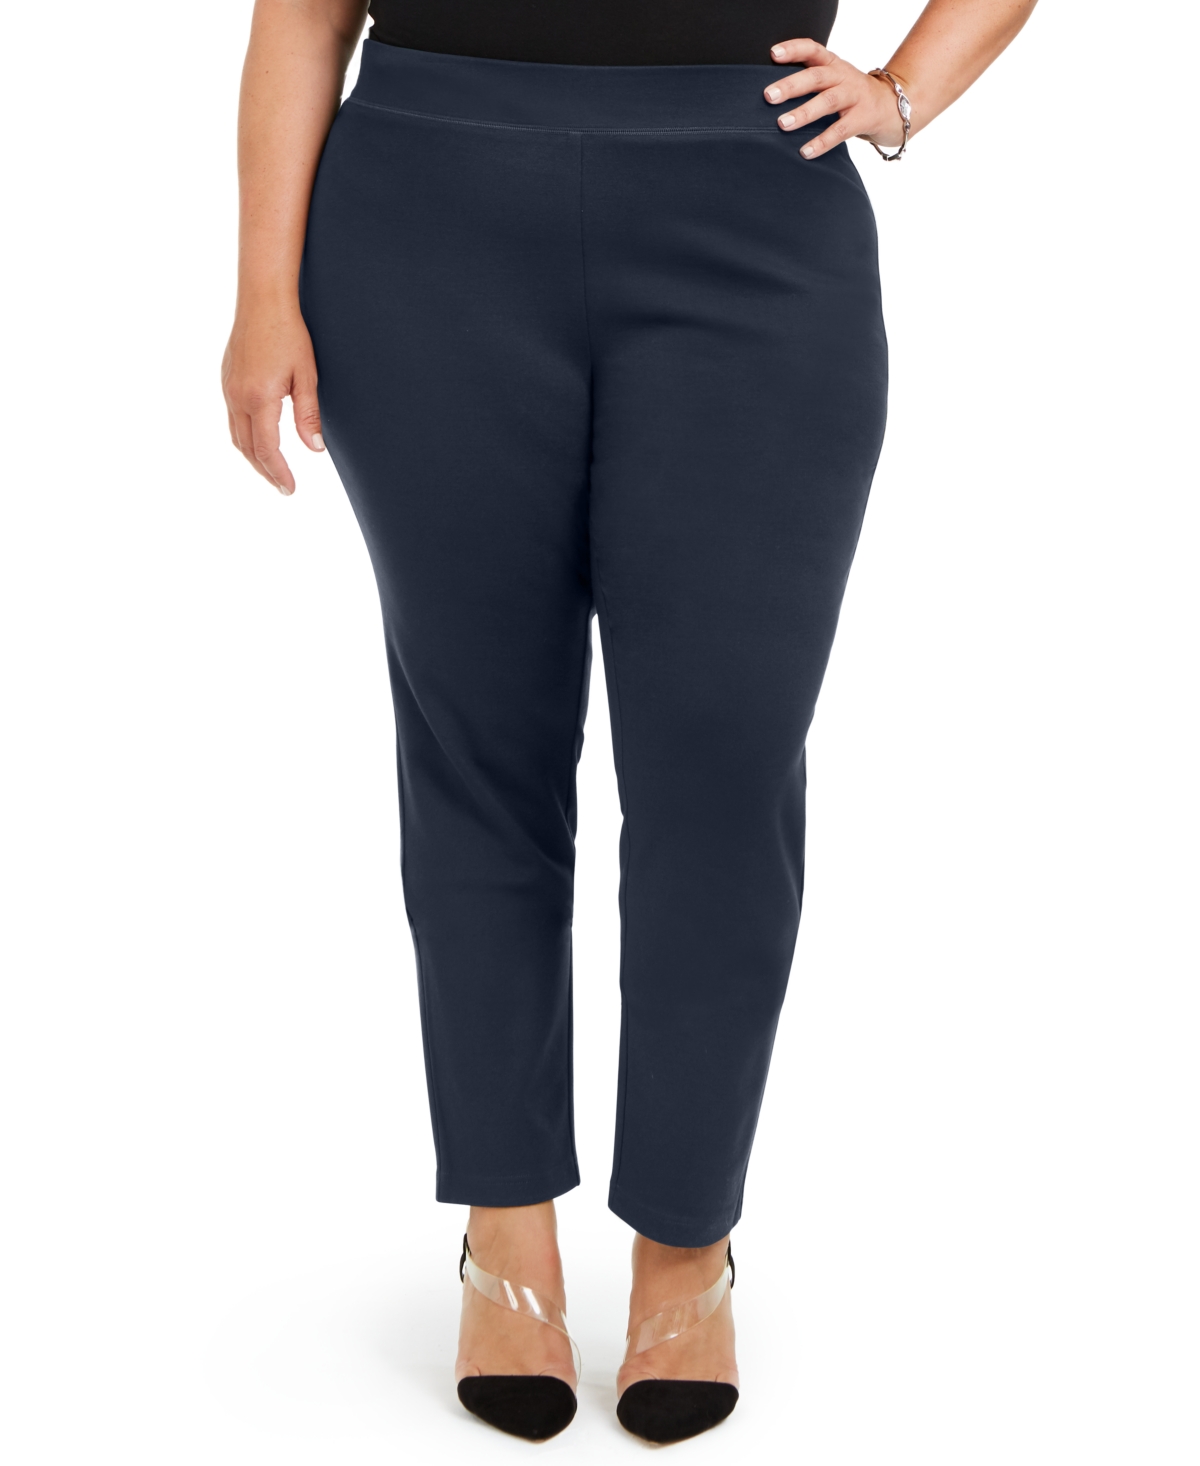 Inc International Concepts Plus Size Skinny Pull-On Ponte Pants, Created for Macy's